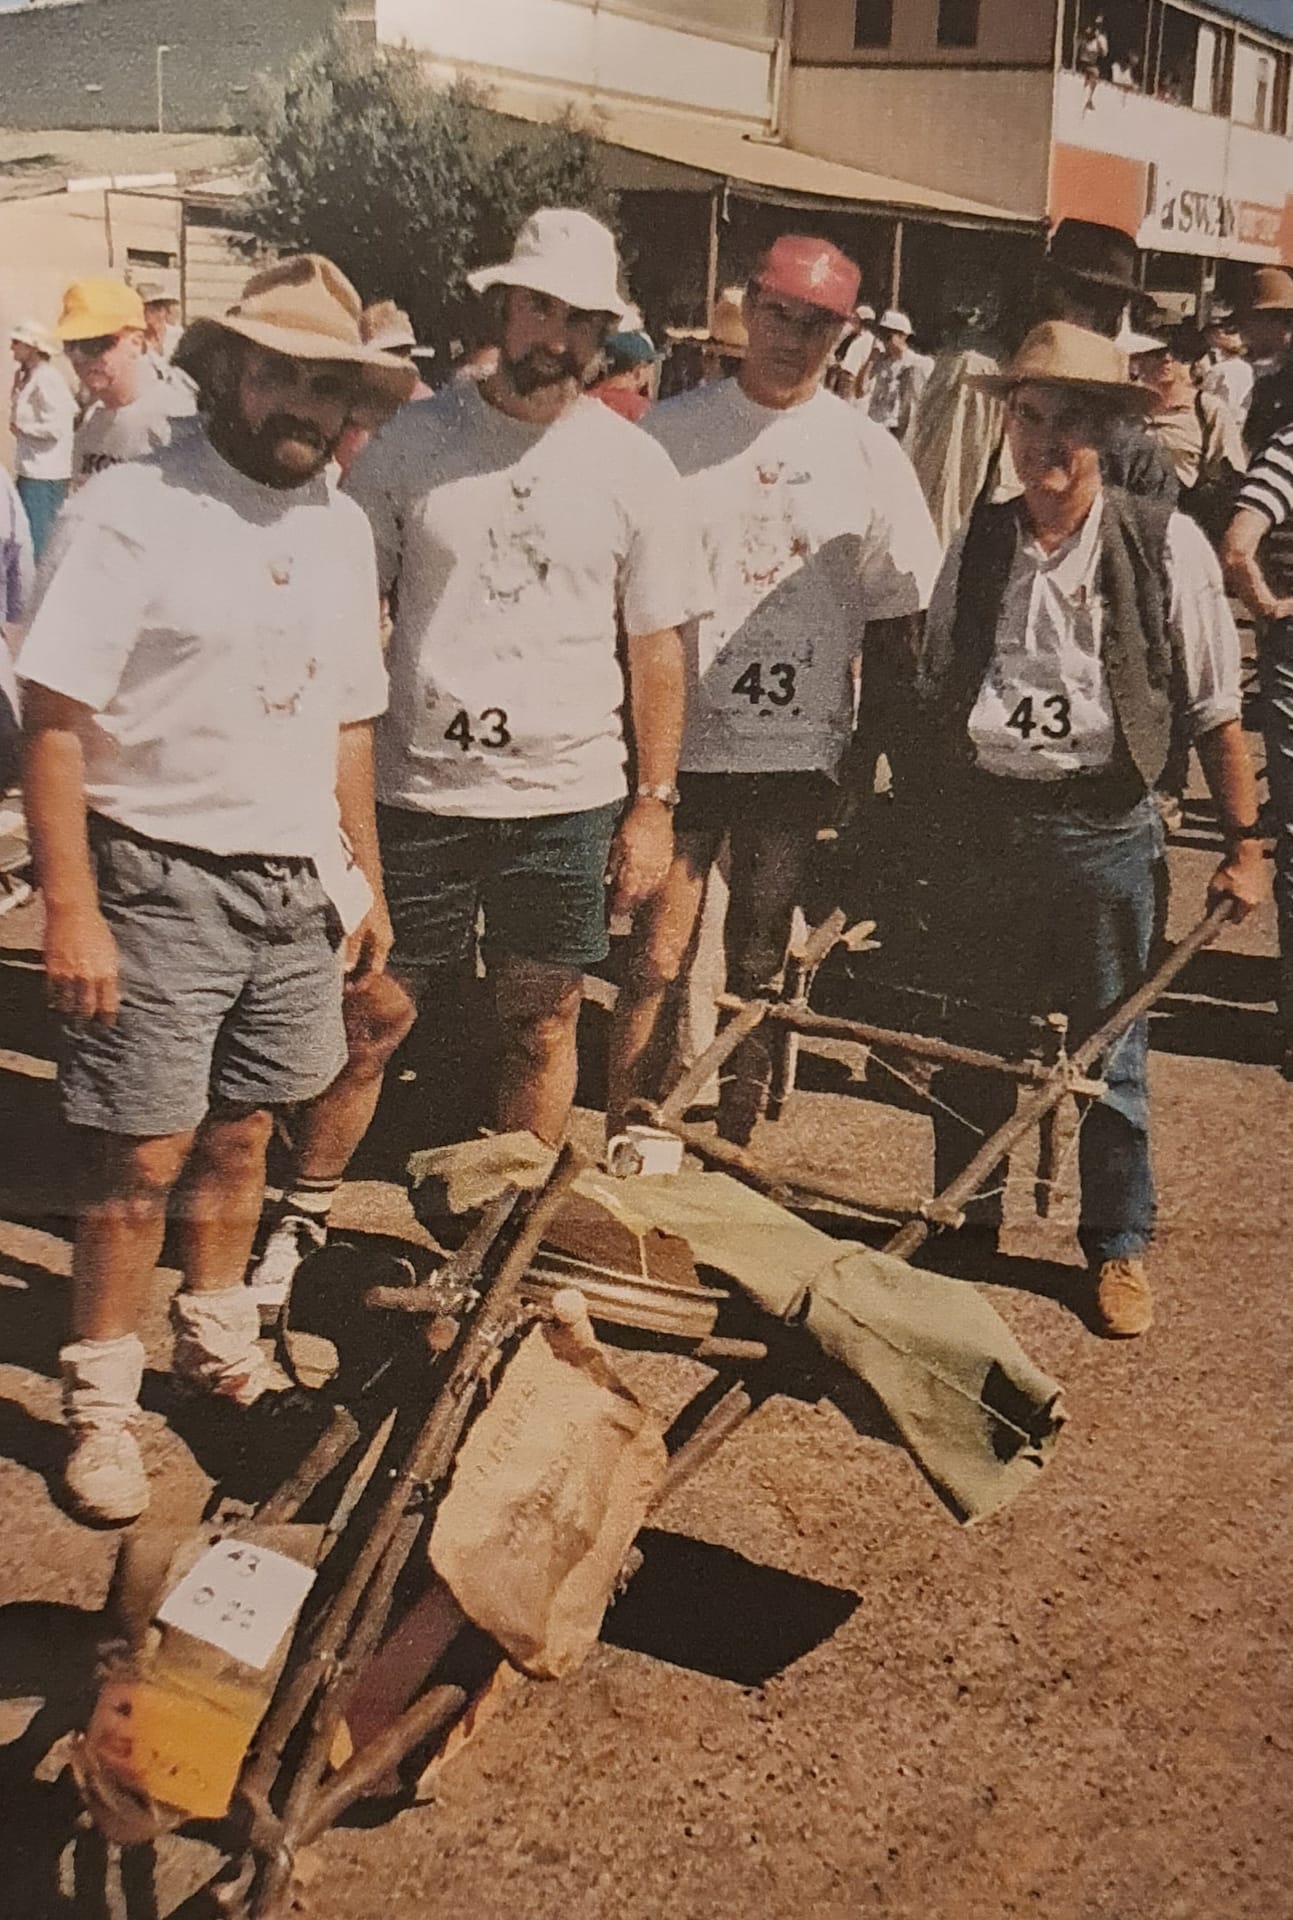 The Delta Team before the start in 1993: (left to right) Kim Stanton-Cook, Roger Thomson, Peter van der Spuy, and David Gellatly